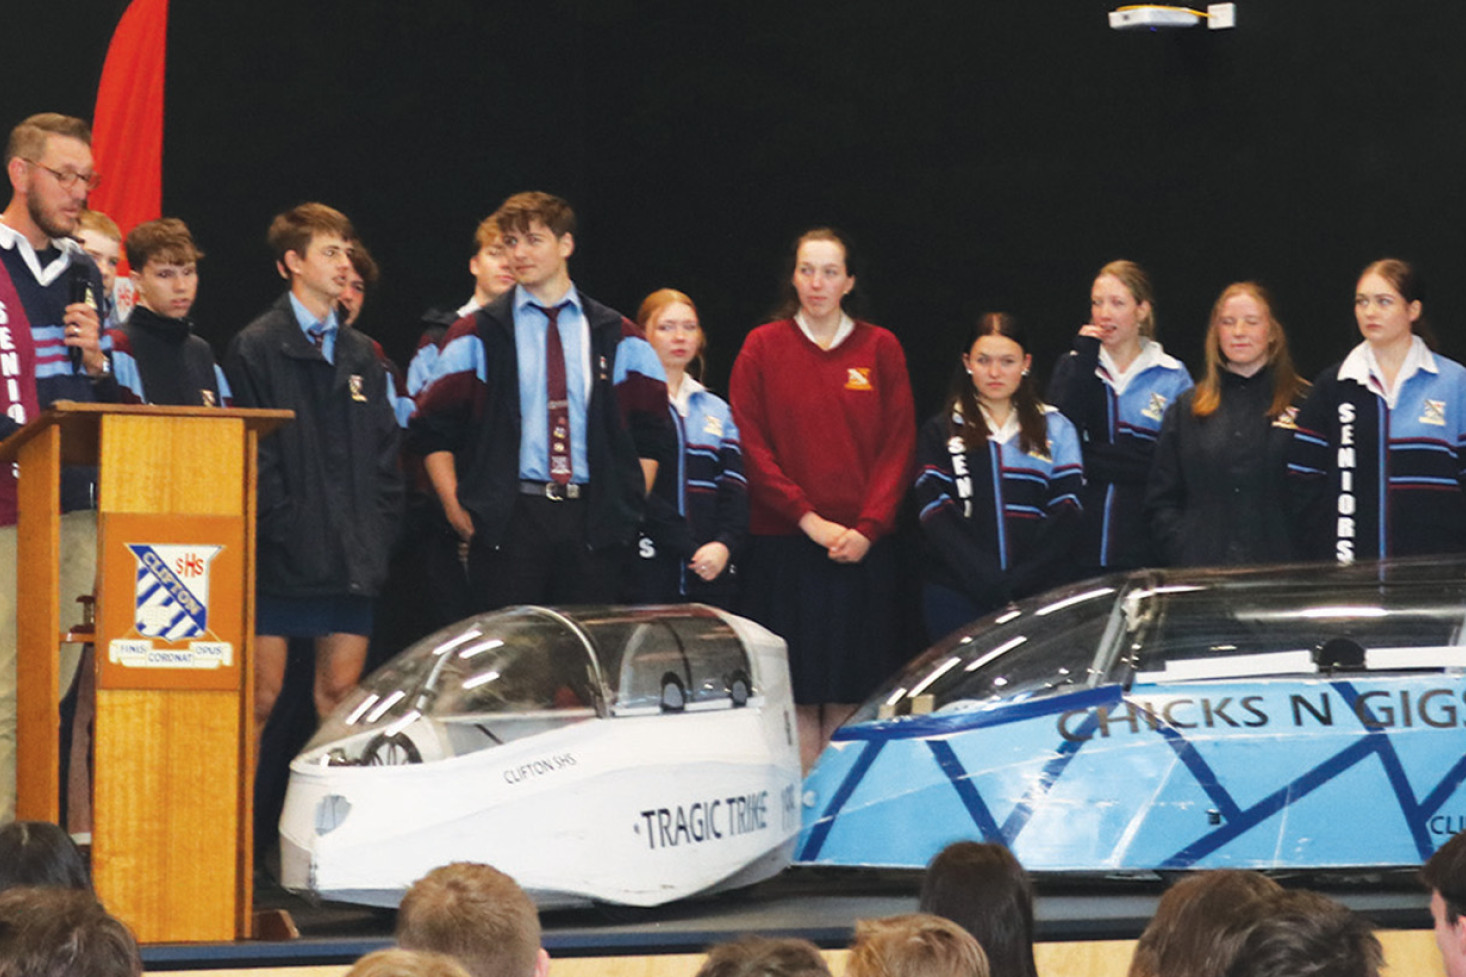 Mr McCardy with the boys and girls HPV teams, including their respective vehicles ‘Tragic Trike’ and ‘Chicks N Gigs’.